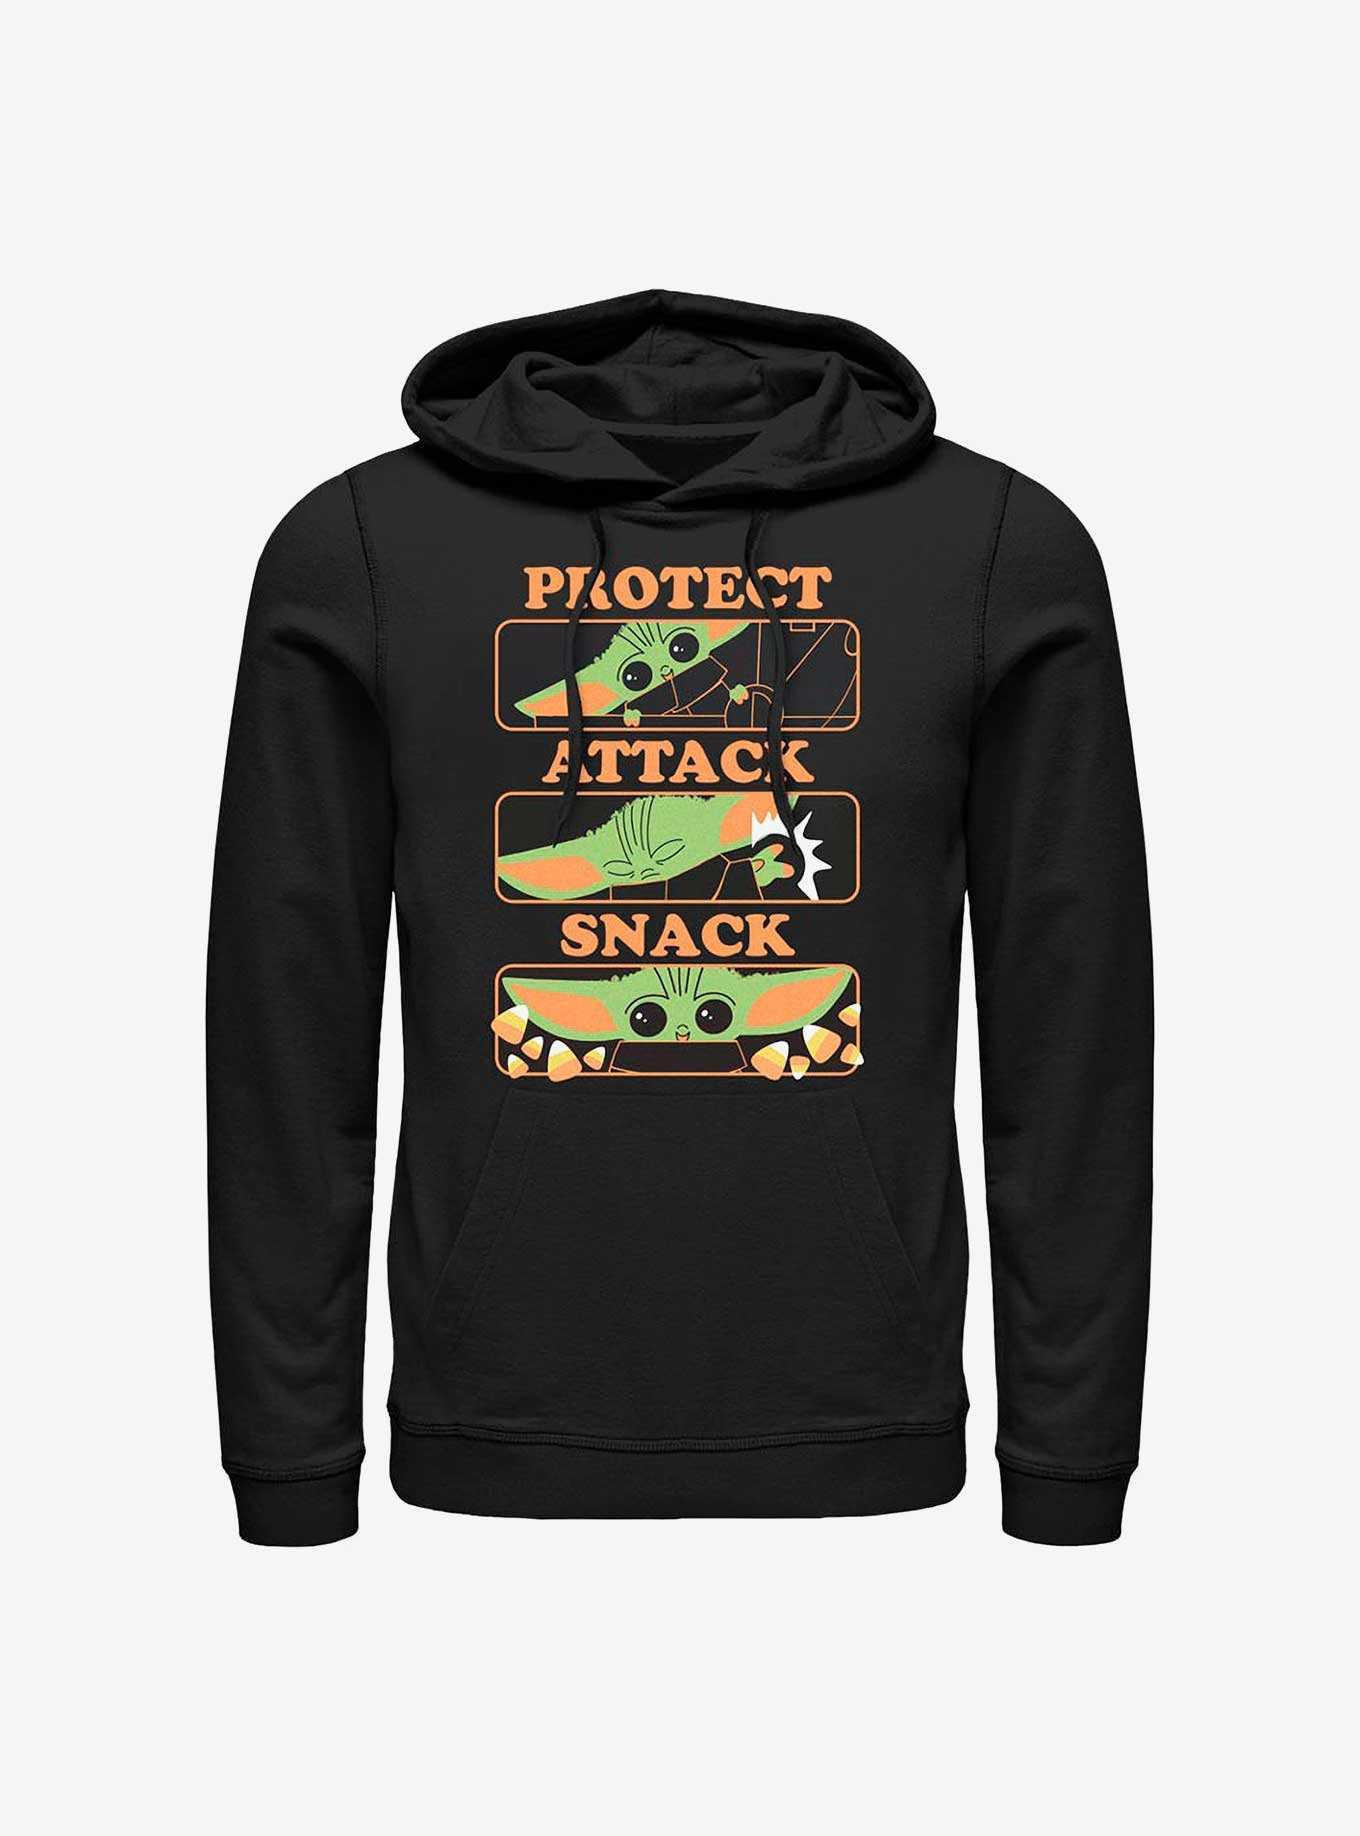 Star Wars The Mandalorian The Child Protect, Attack, & Snack Hoodie, , hi-res